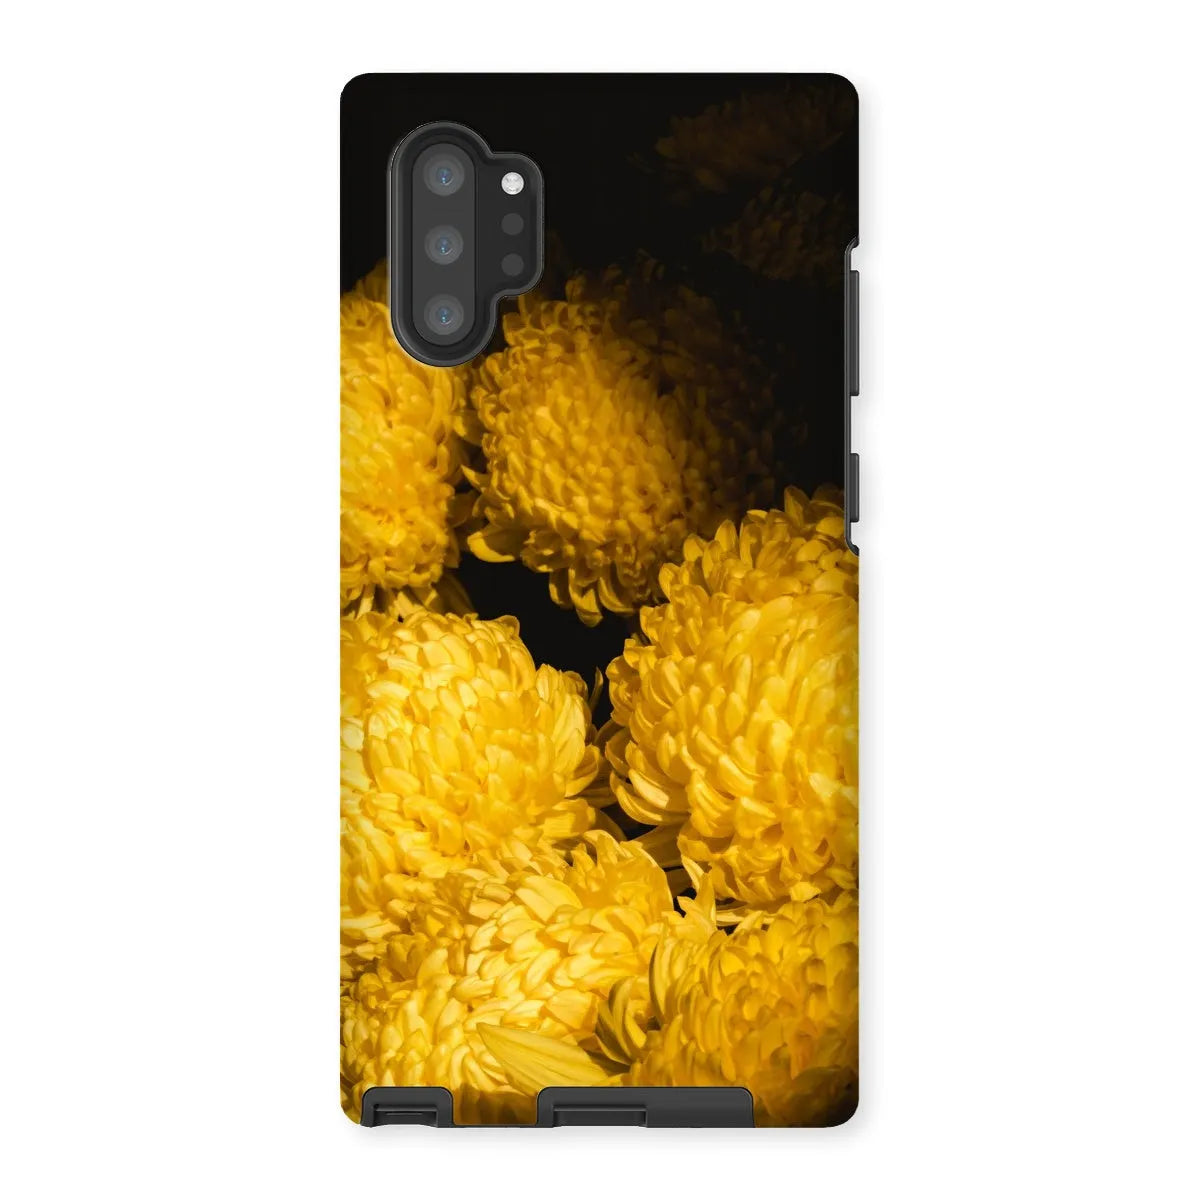 Field Of Dreams Tough Phone Case - Samsung Galaxy Note 10p / Matte - Mobile Phone Cases - Aesthetic Art